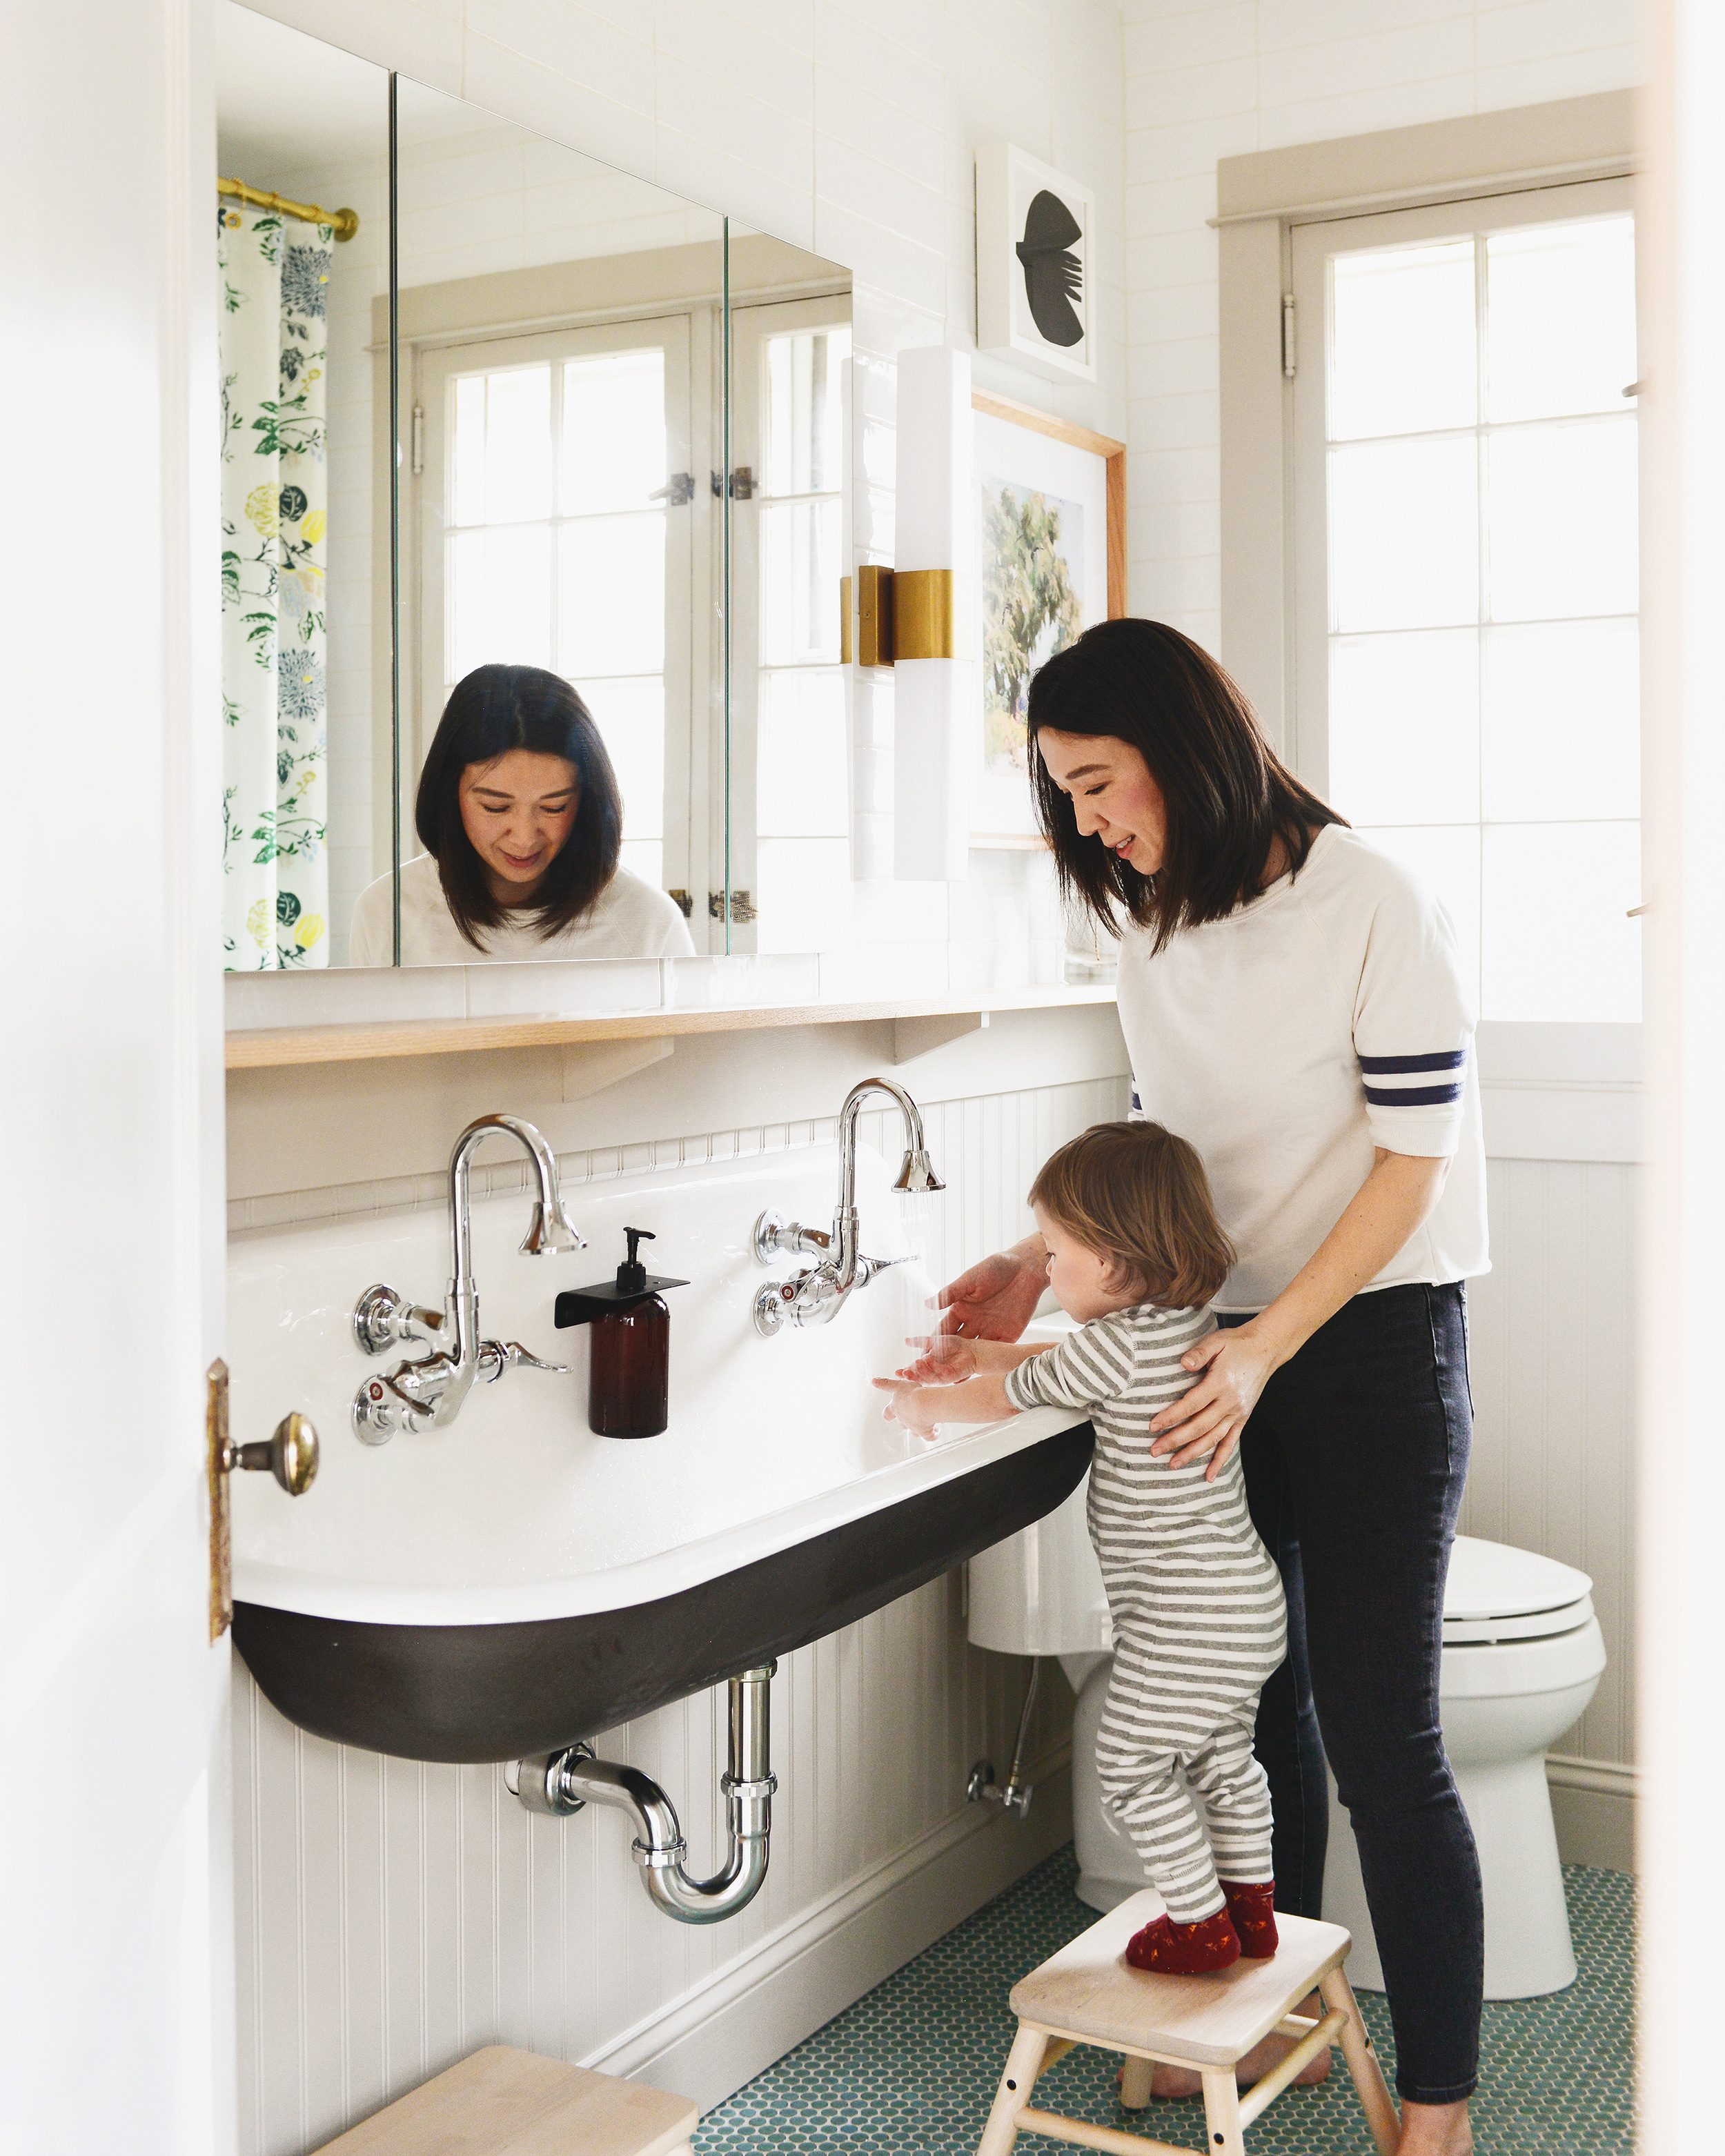 A mother and daughter wash their hands together in a large white basin sink in a tan and green bathroom.// via Yellow Brick Home